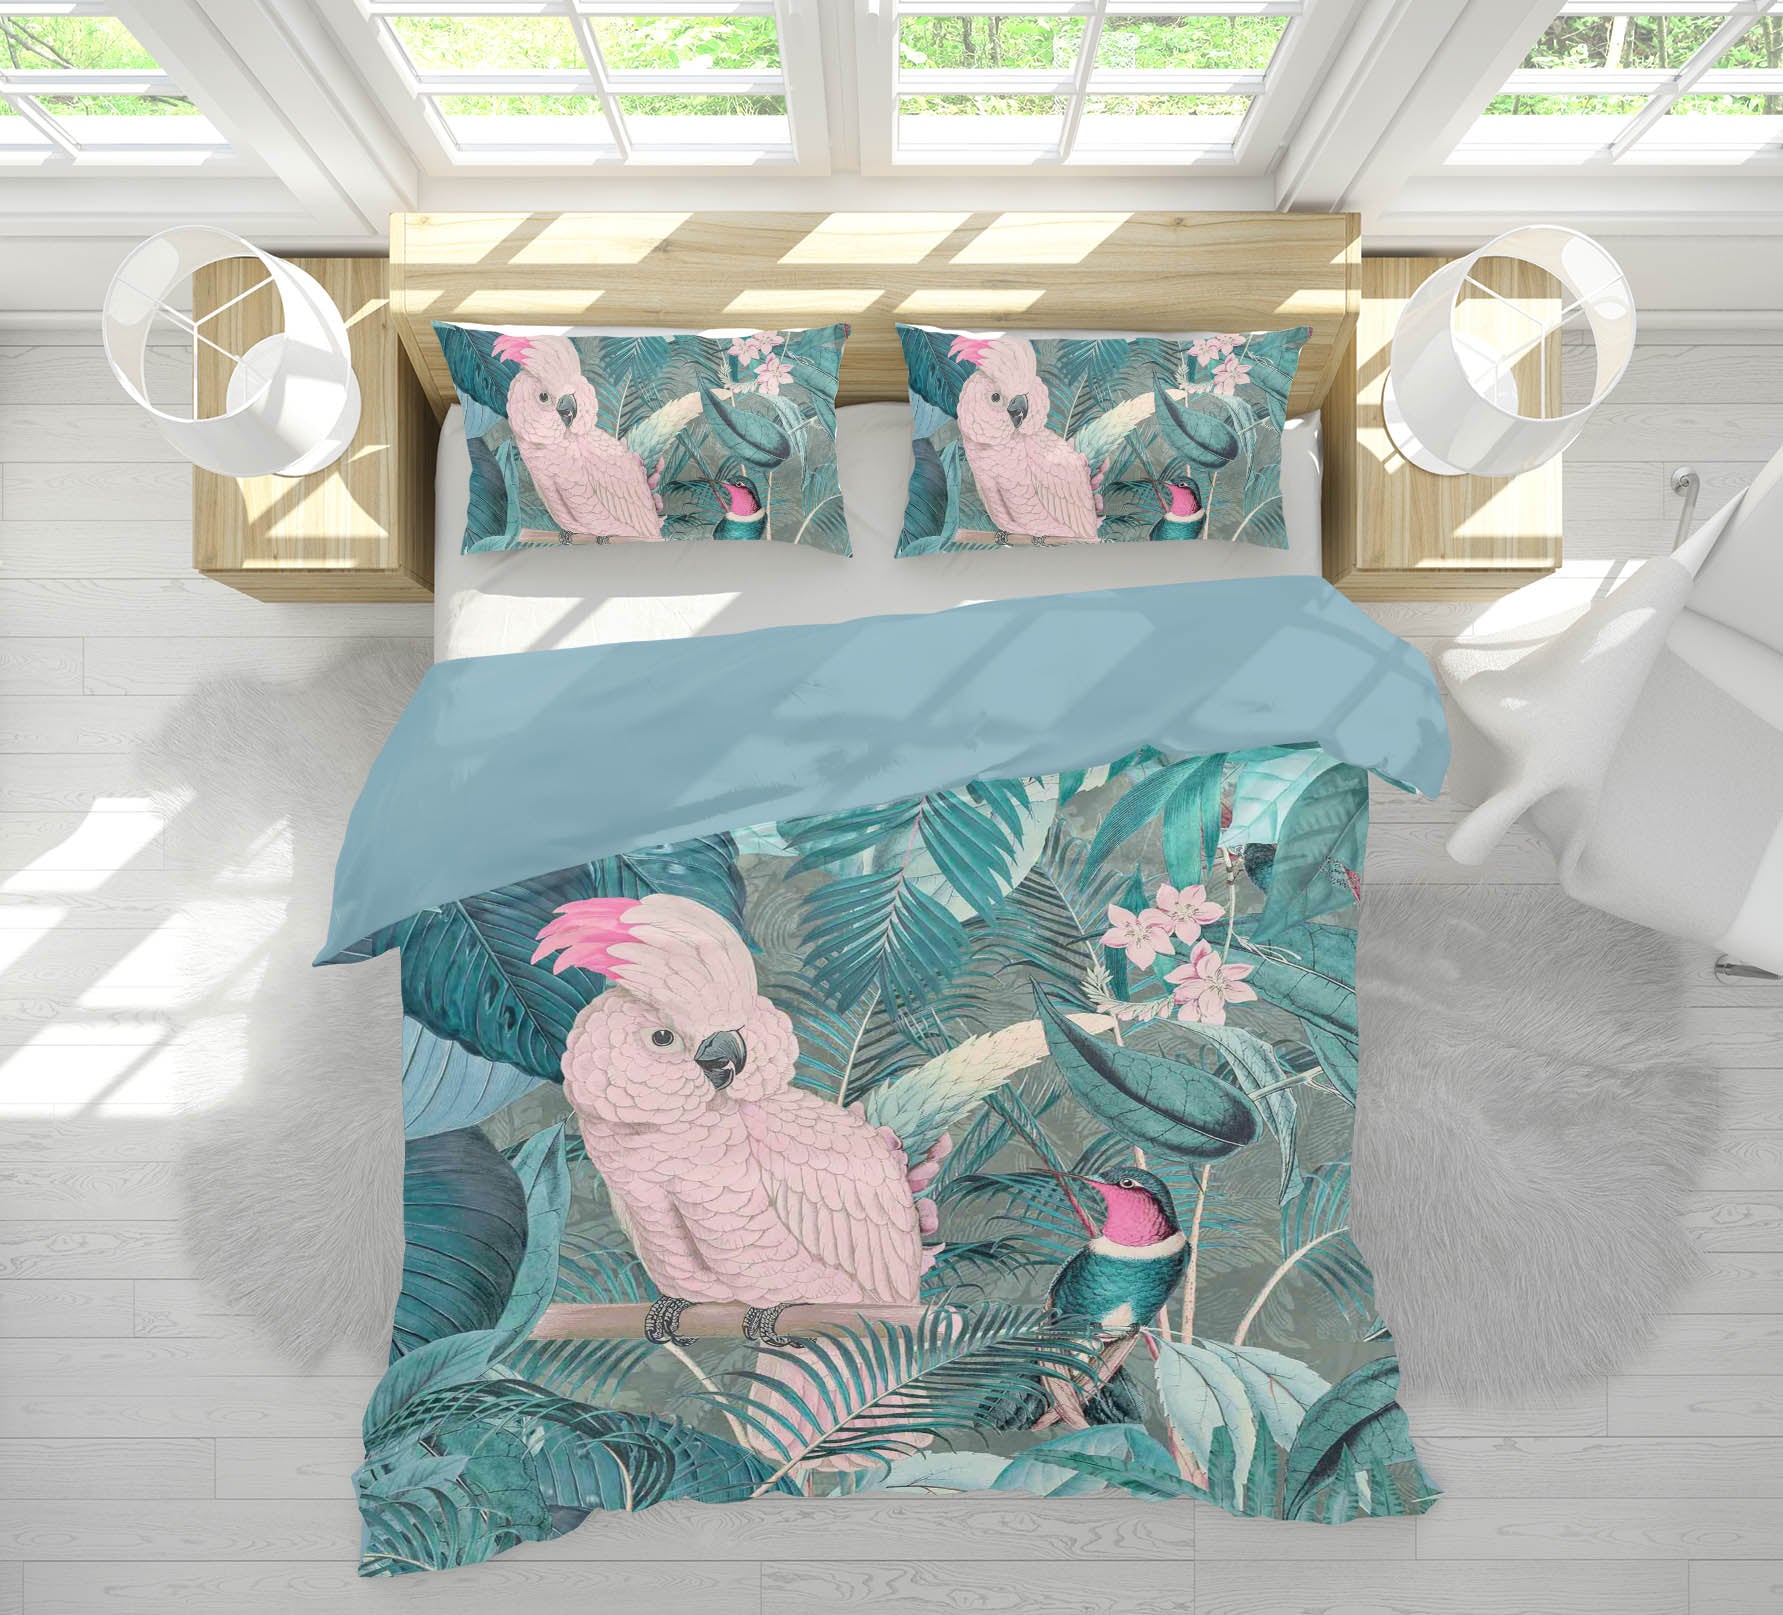 3D Jungle Friends 2126 Andrea haase Bedding Bed Pillowcases Quilt